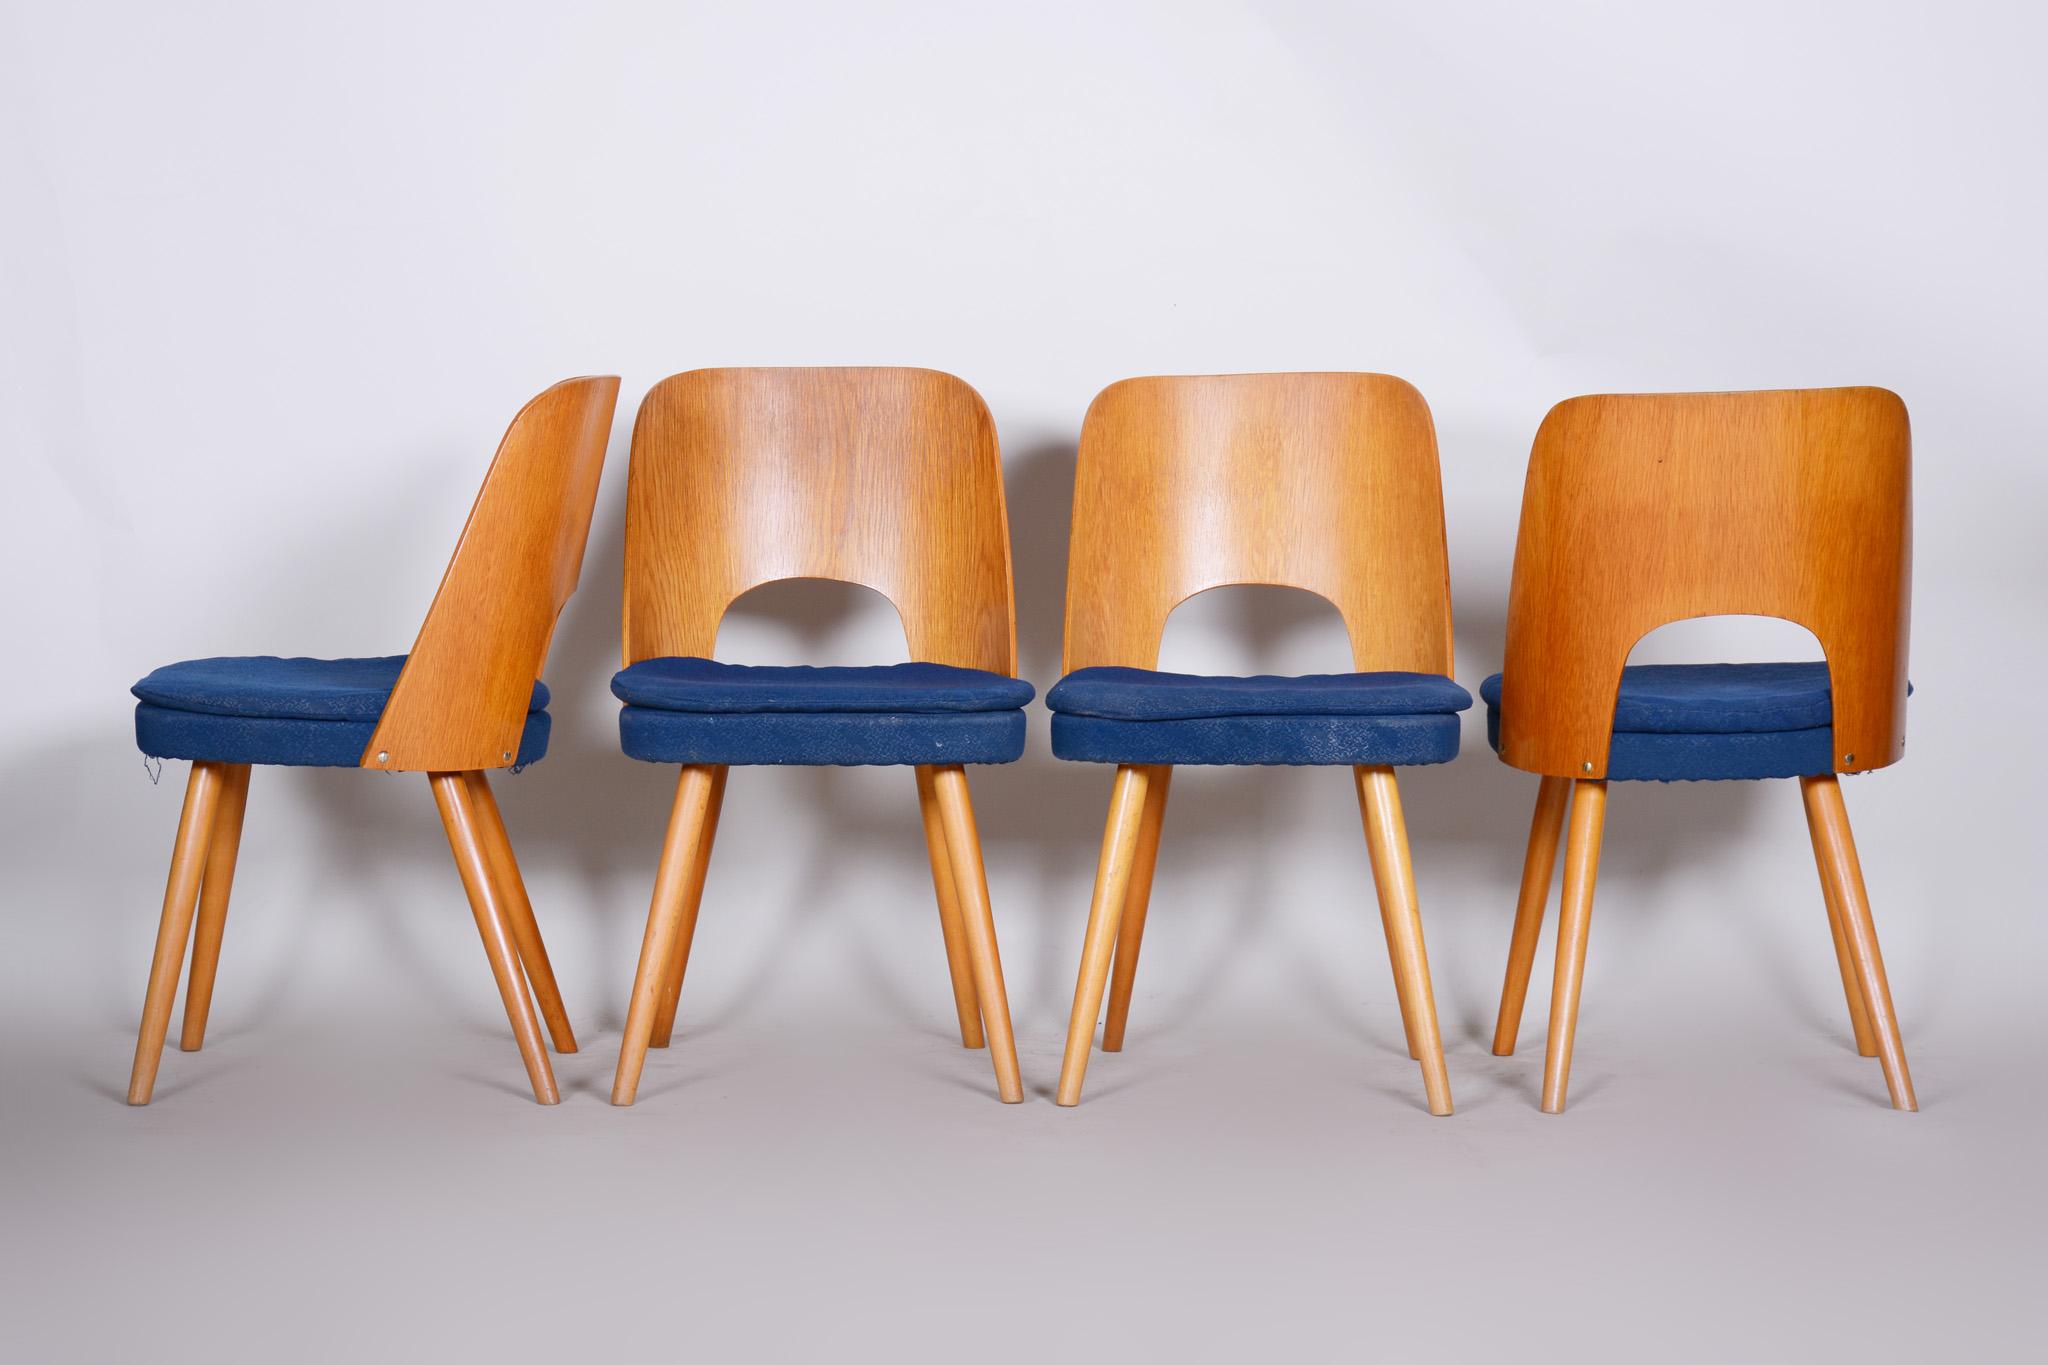 20th Century Well preserved Czech Brown and Blue Ash Chairs by Oswald Haerdtl, 4 Pcs, 1950s